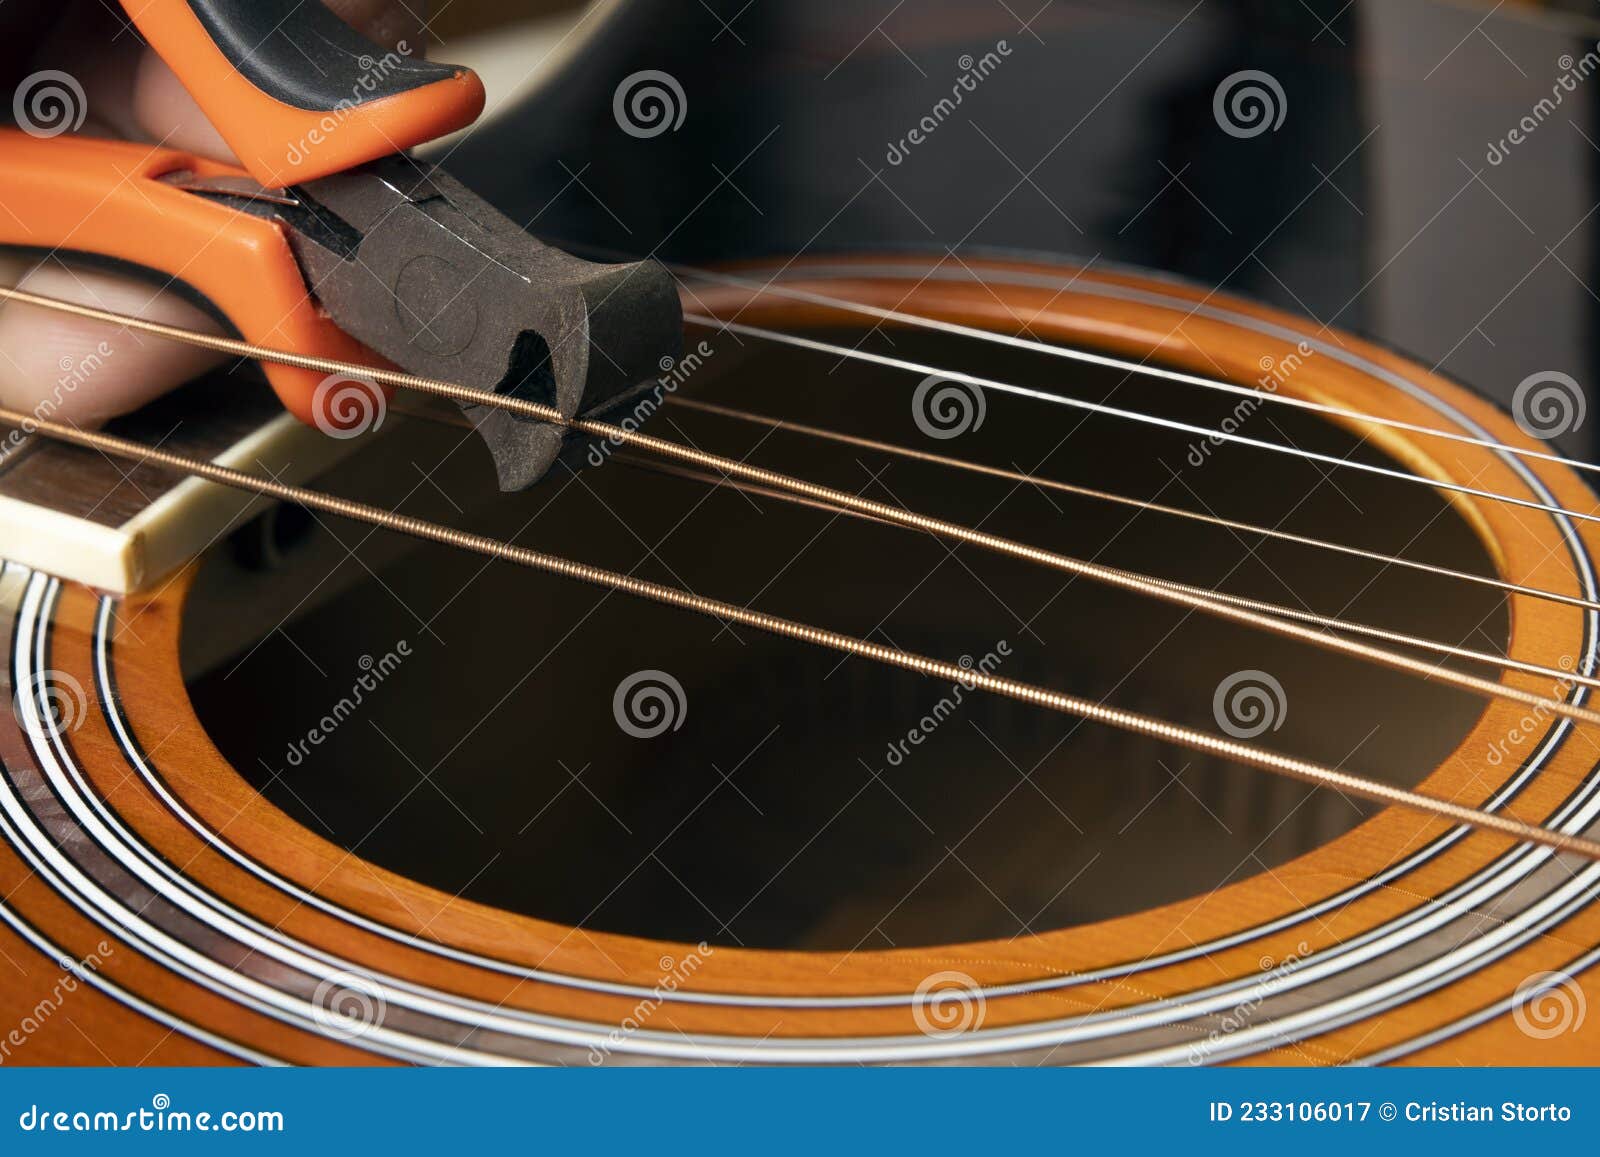 guitar restring: musician cut strings from an acoustic guitar